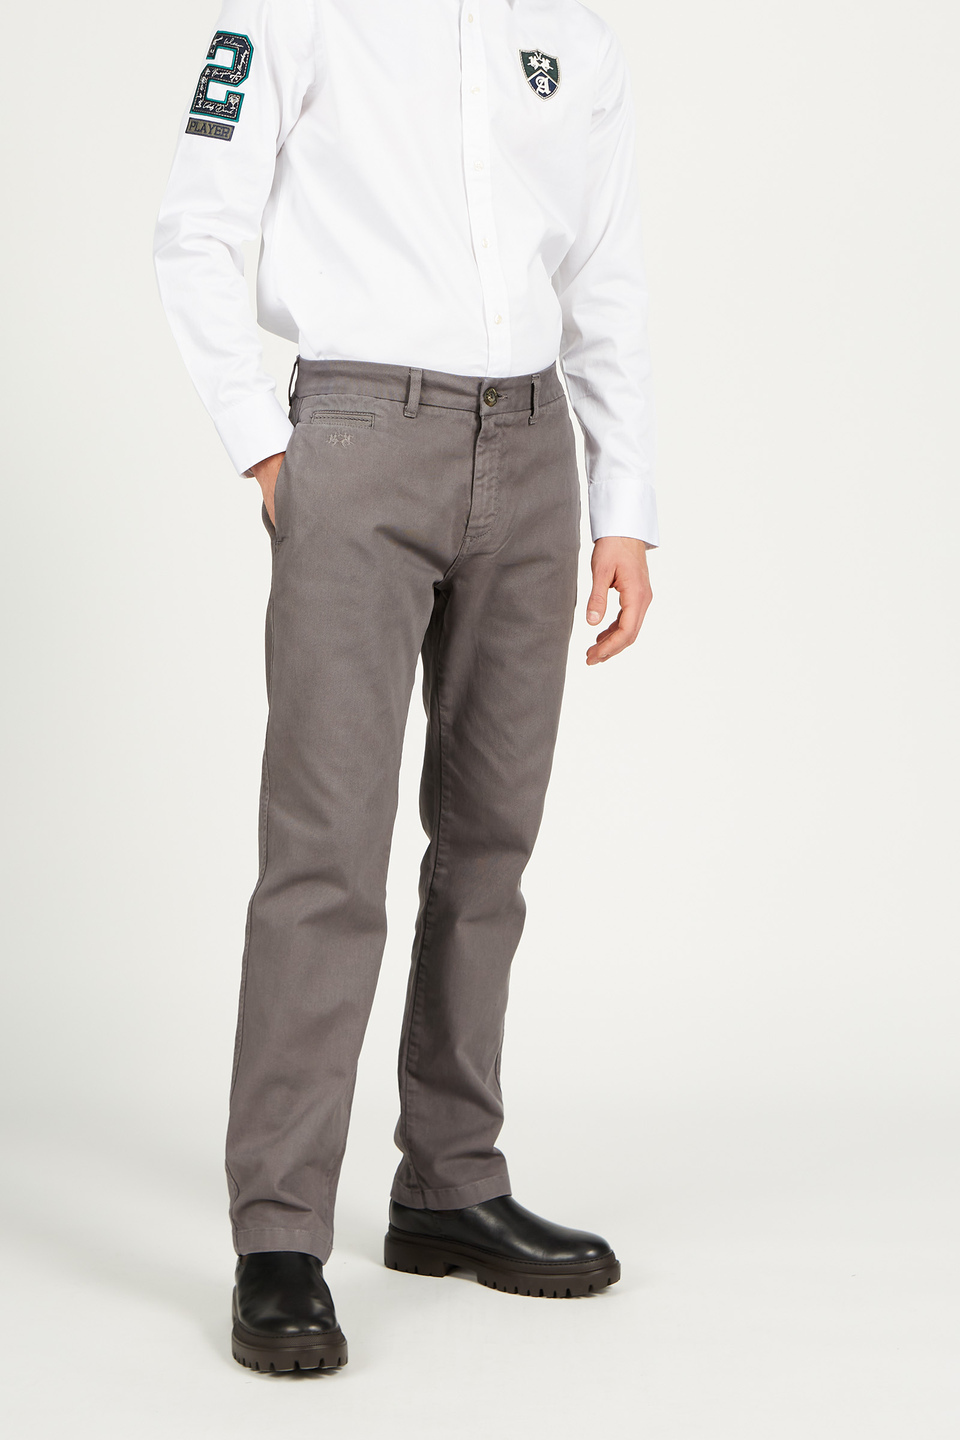 Men’s trousers in cotton regular fit chino model | La Martina - Official Online Shop